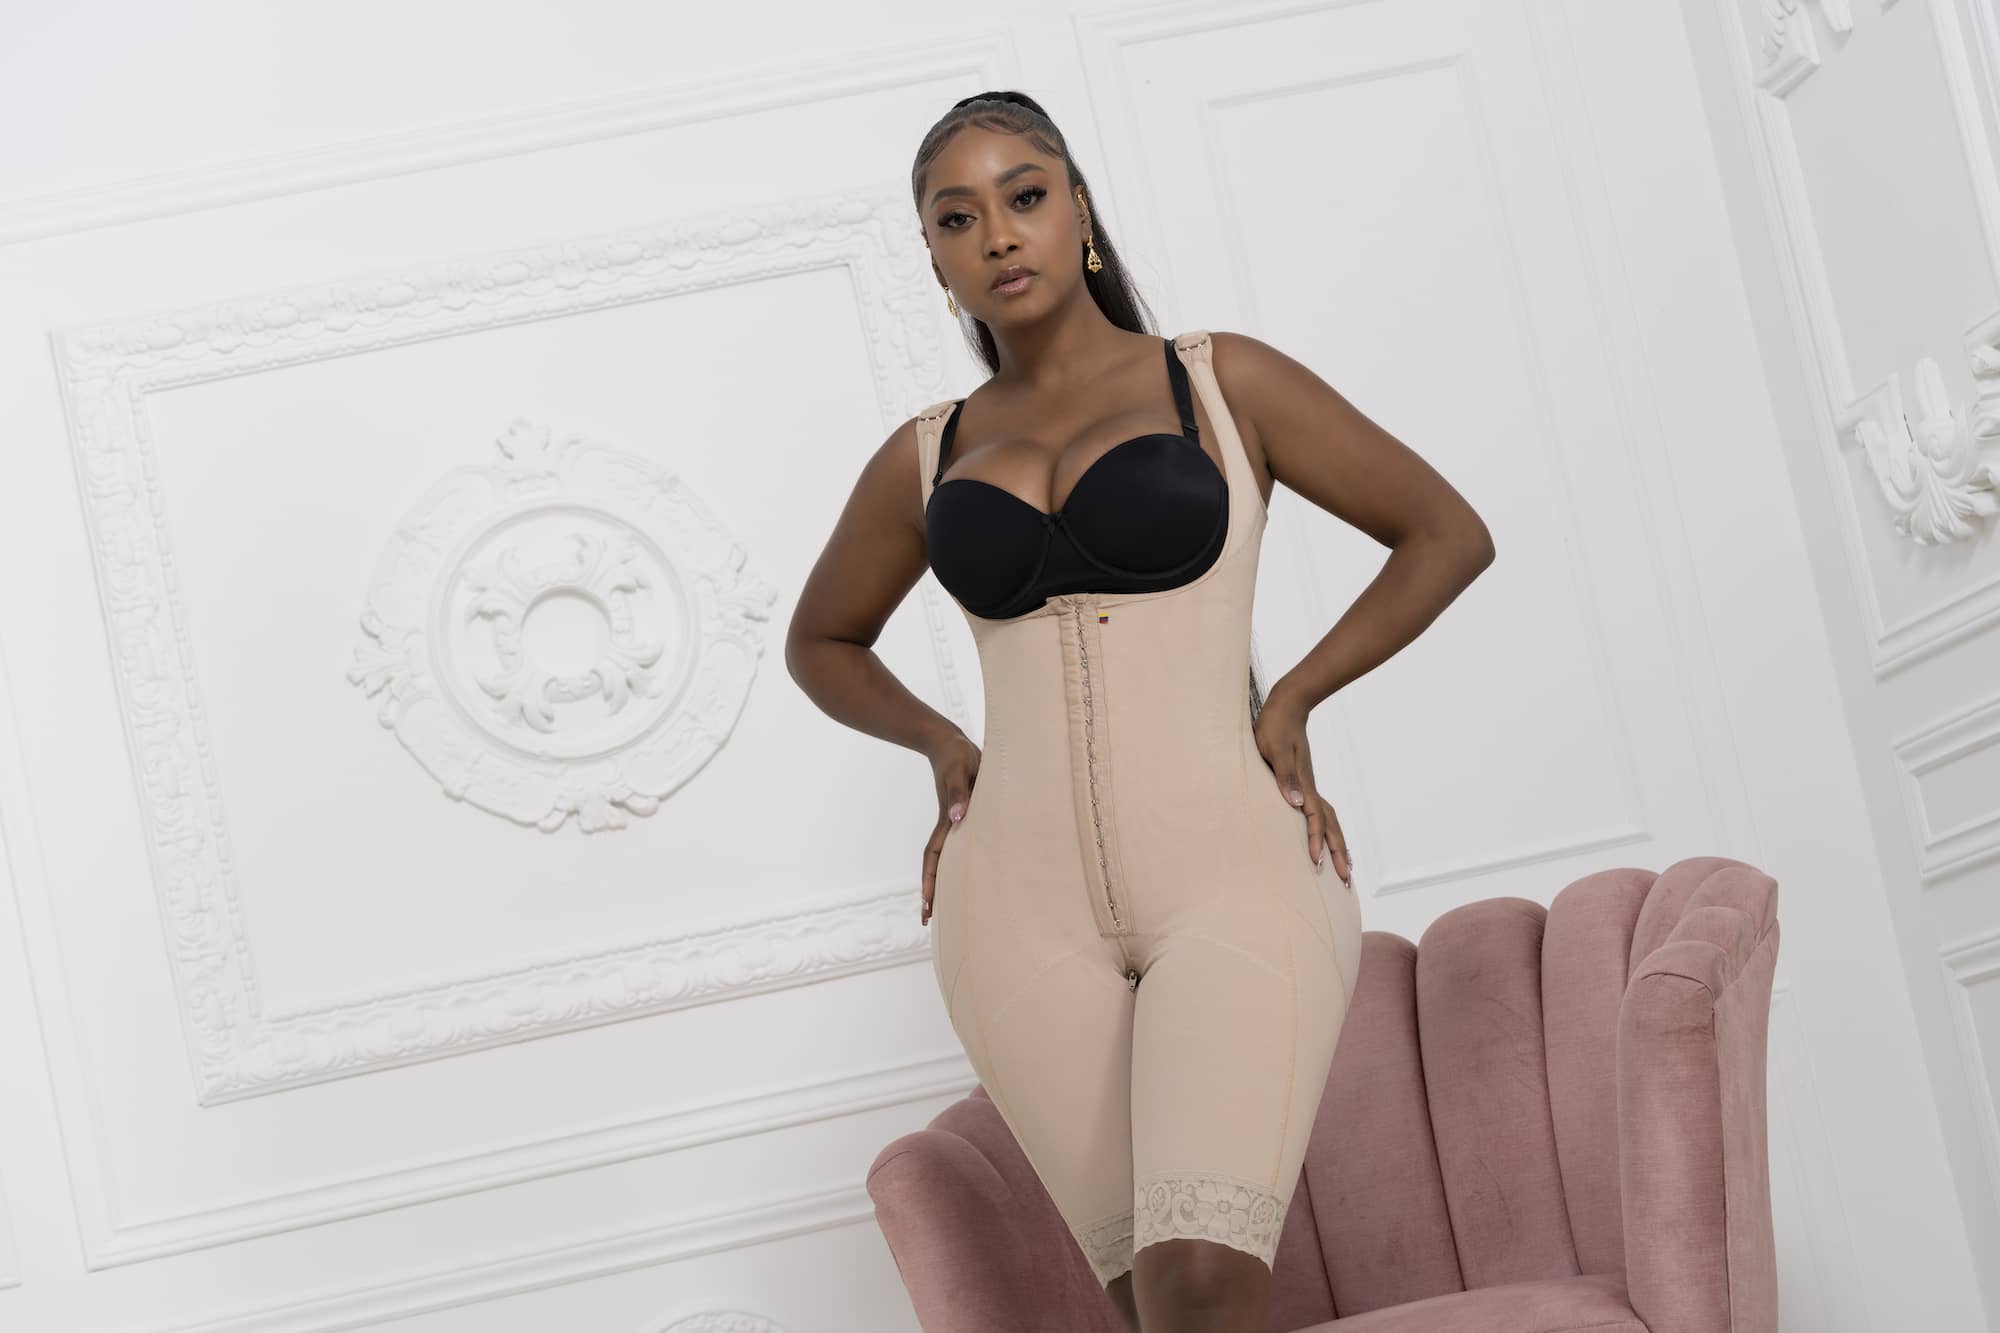 Choosing the Right Shapewear: How to Find Your Snatched Body - Snatched body